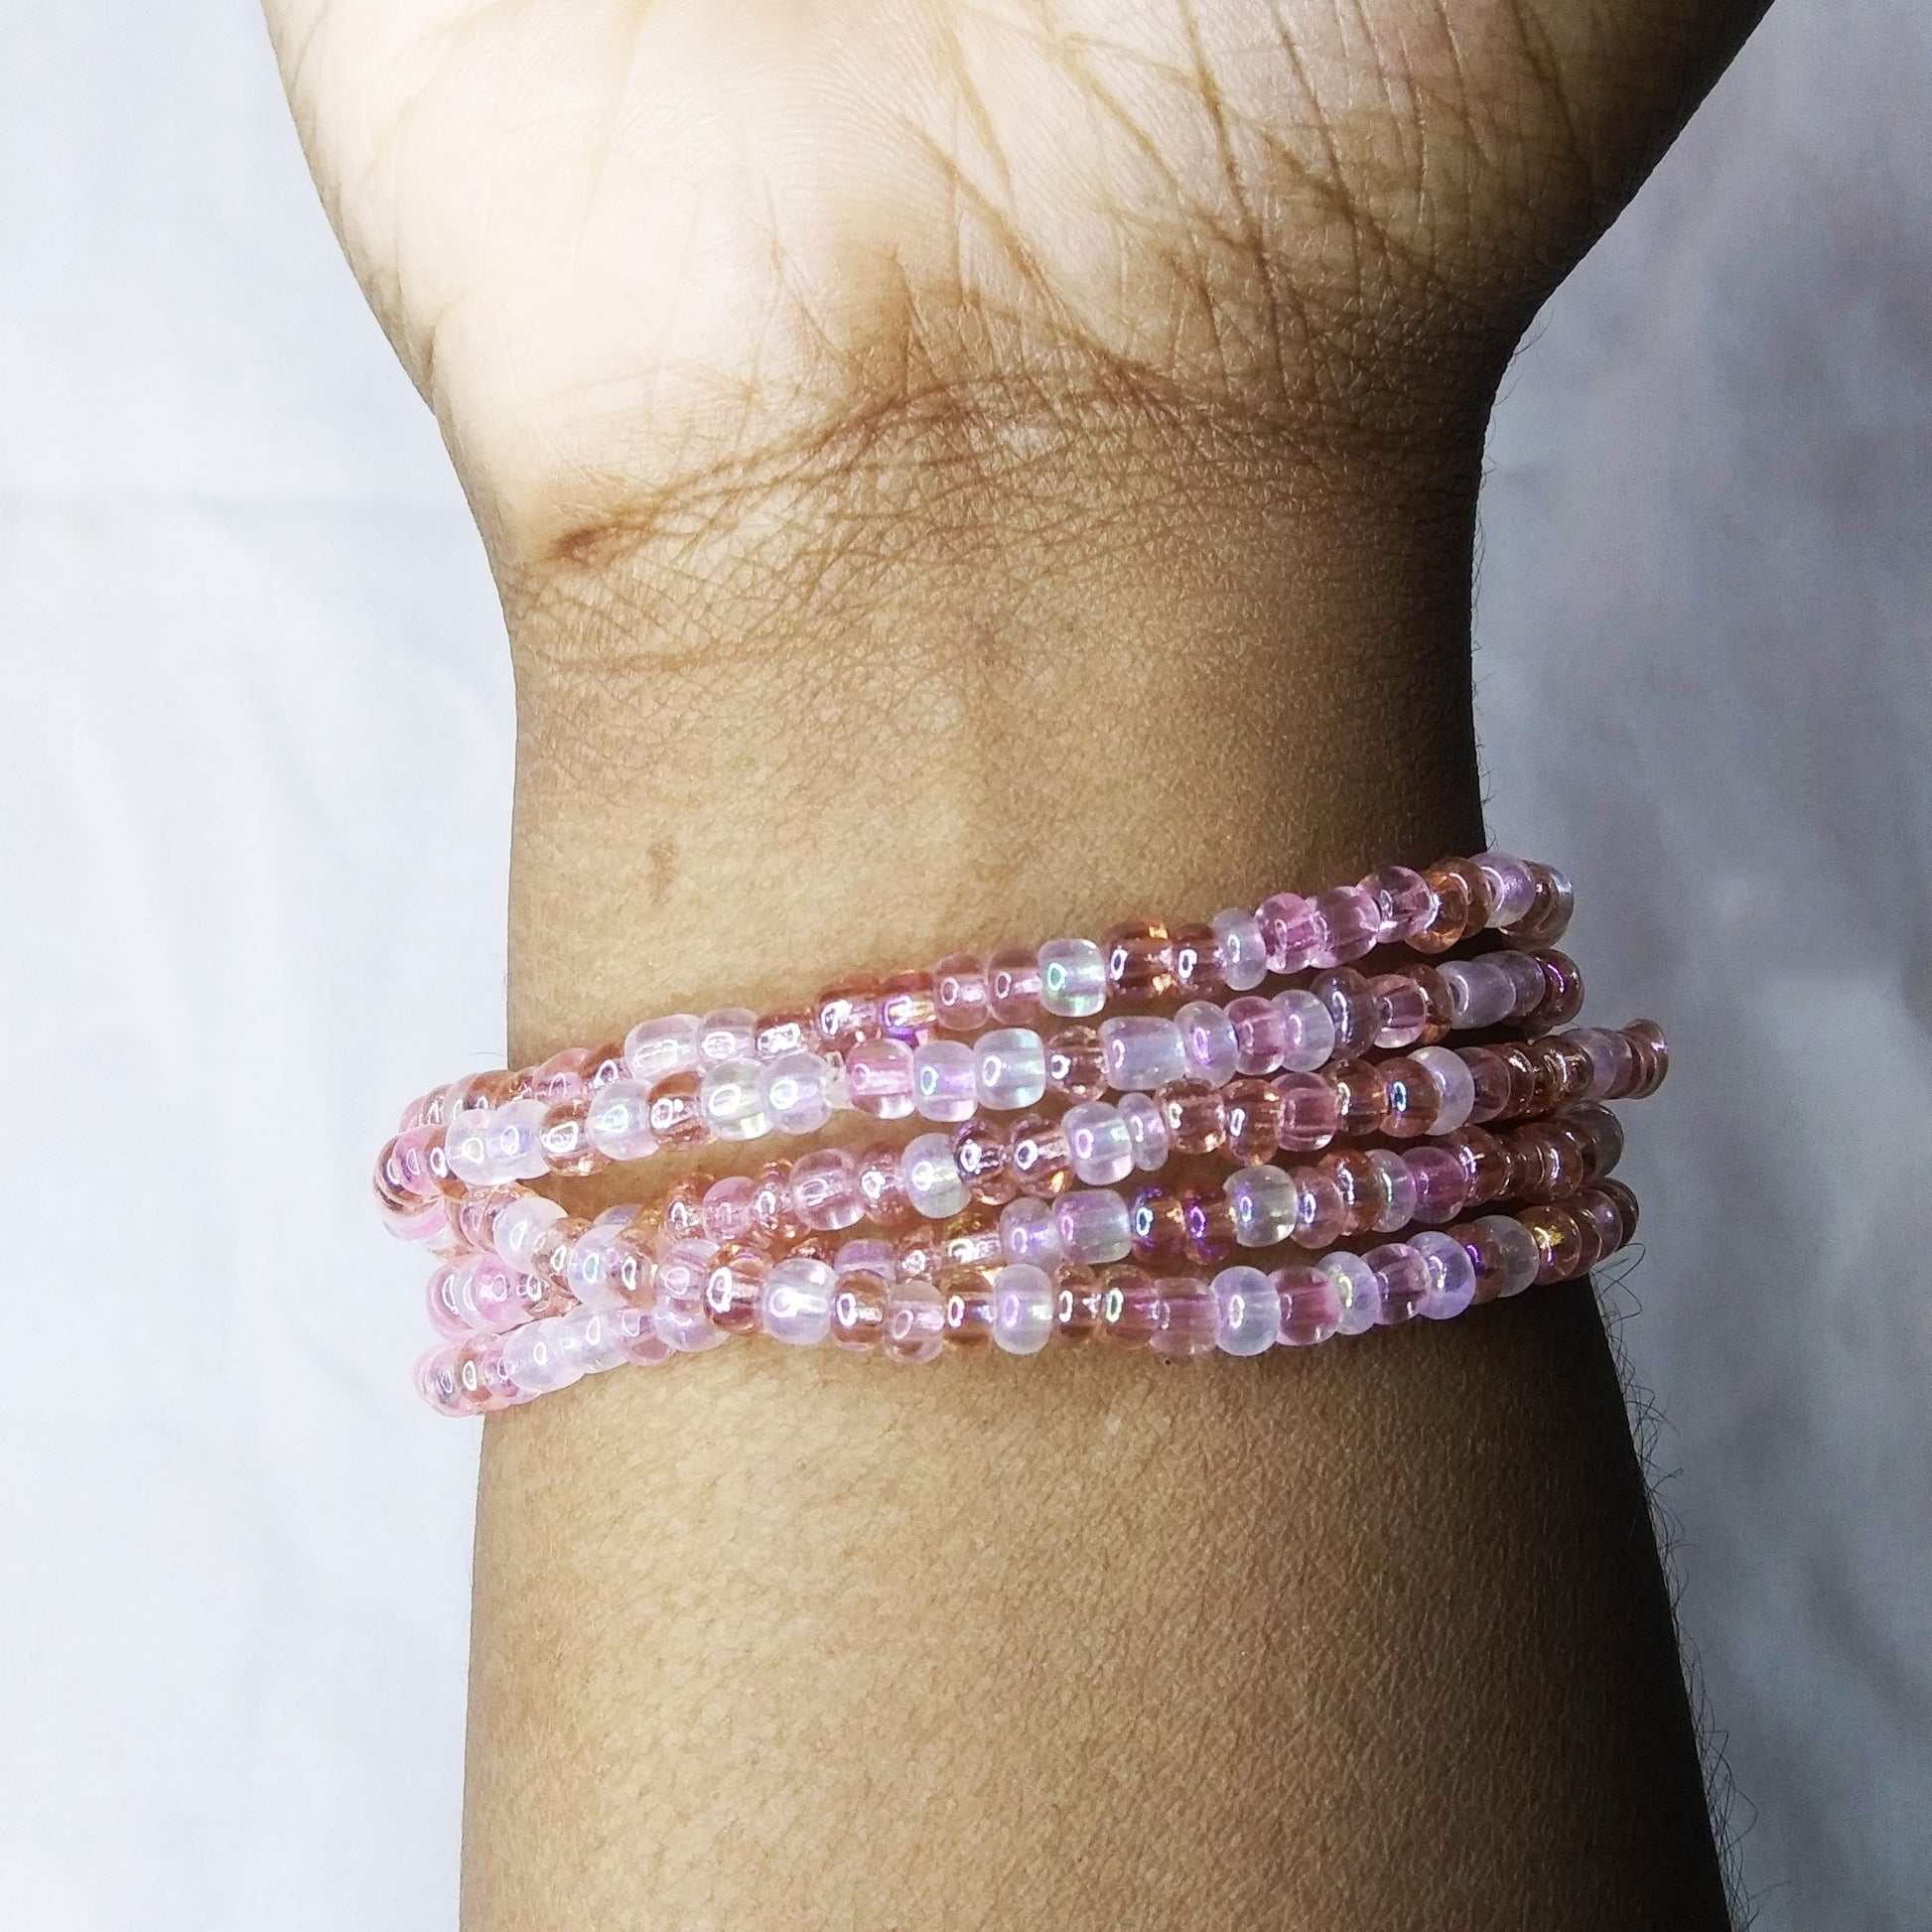 Five seed bead bracelets for different holidays